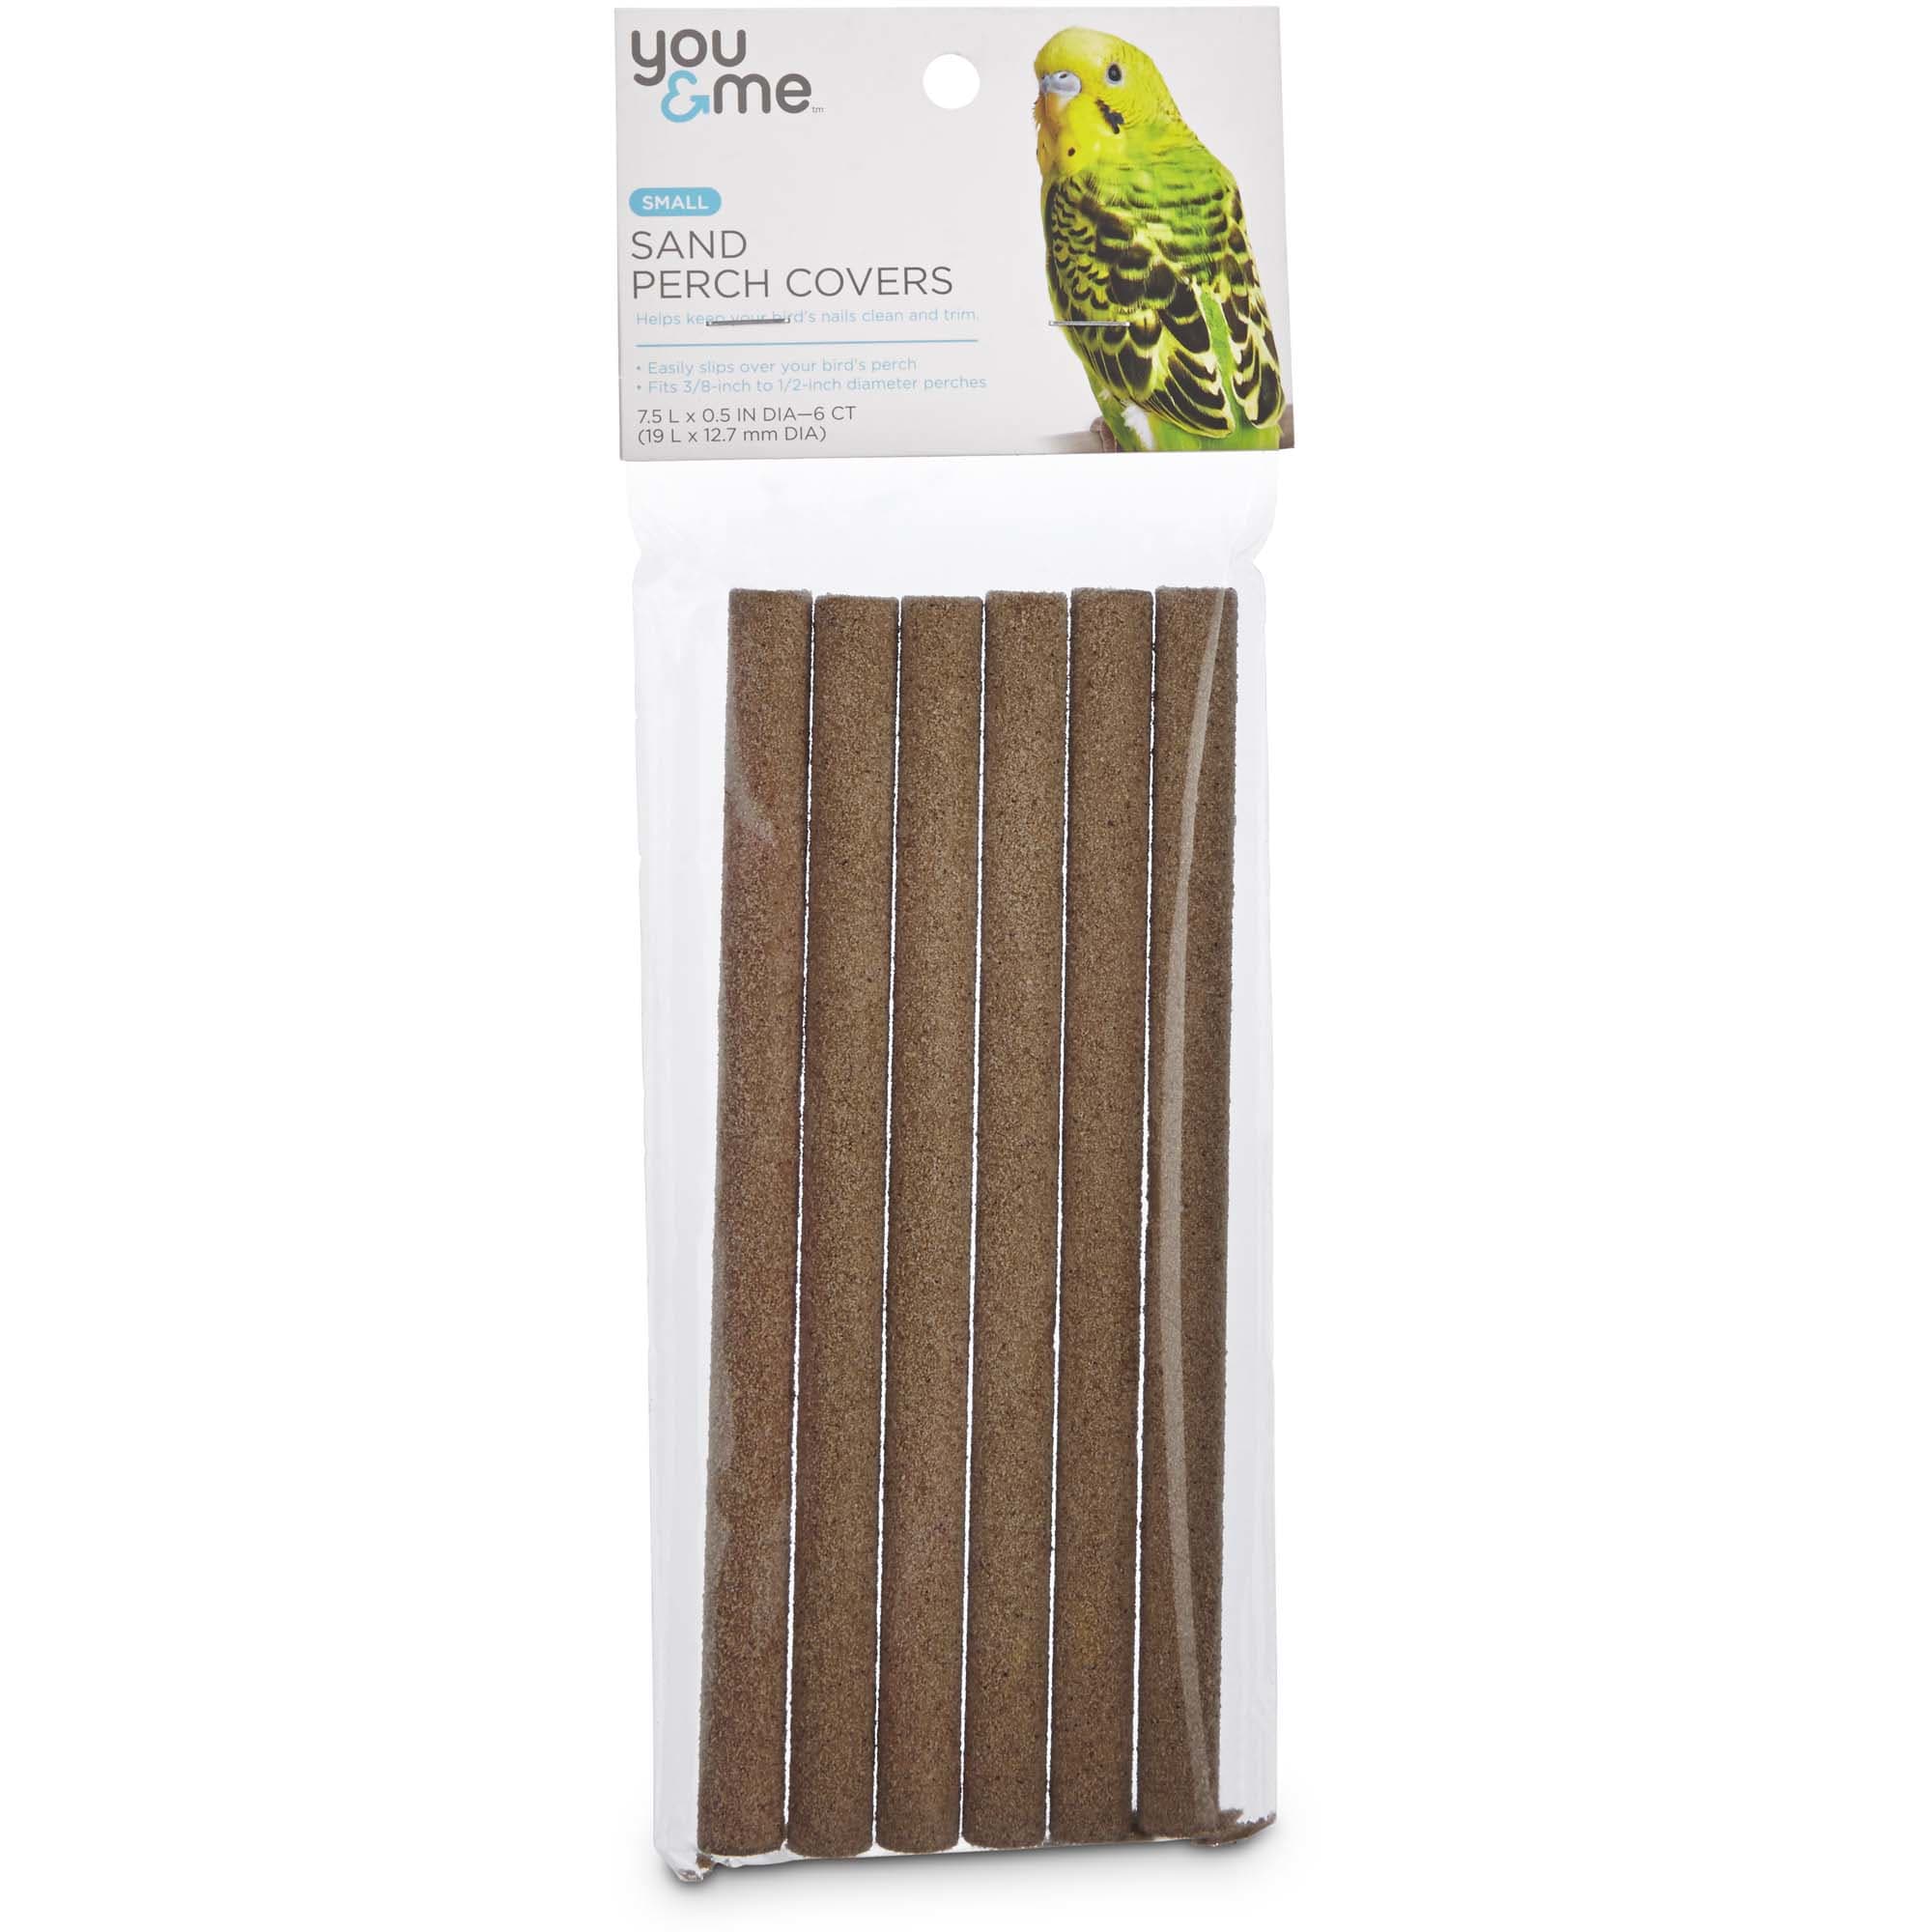 eCOTRITION Sanded Perch Cover Small Pack of 10 6 Pack 